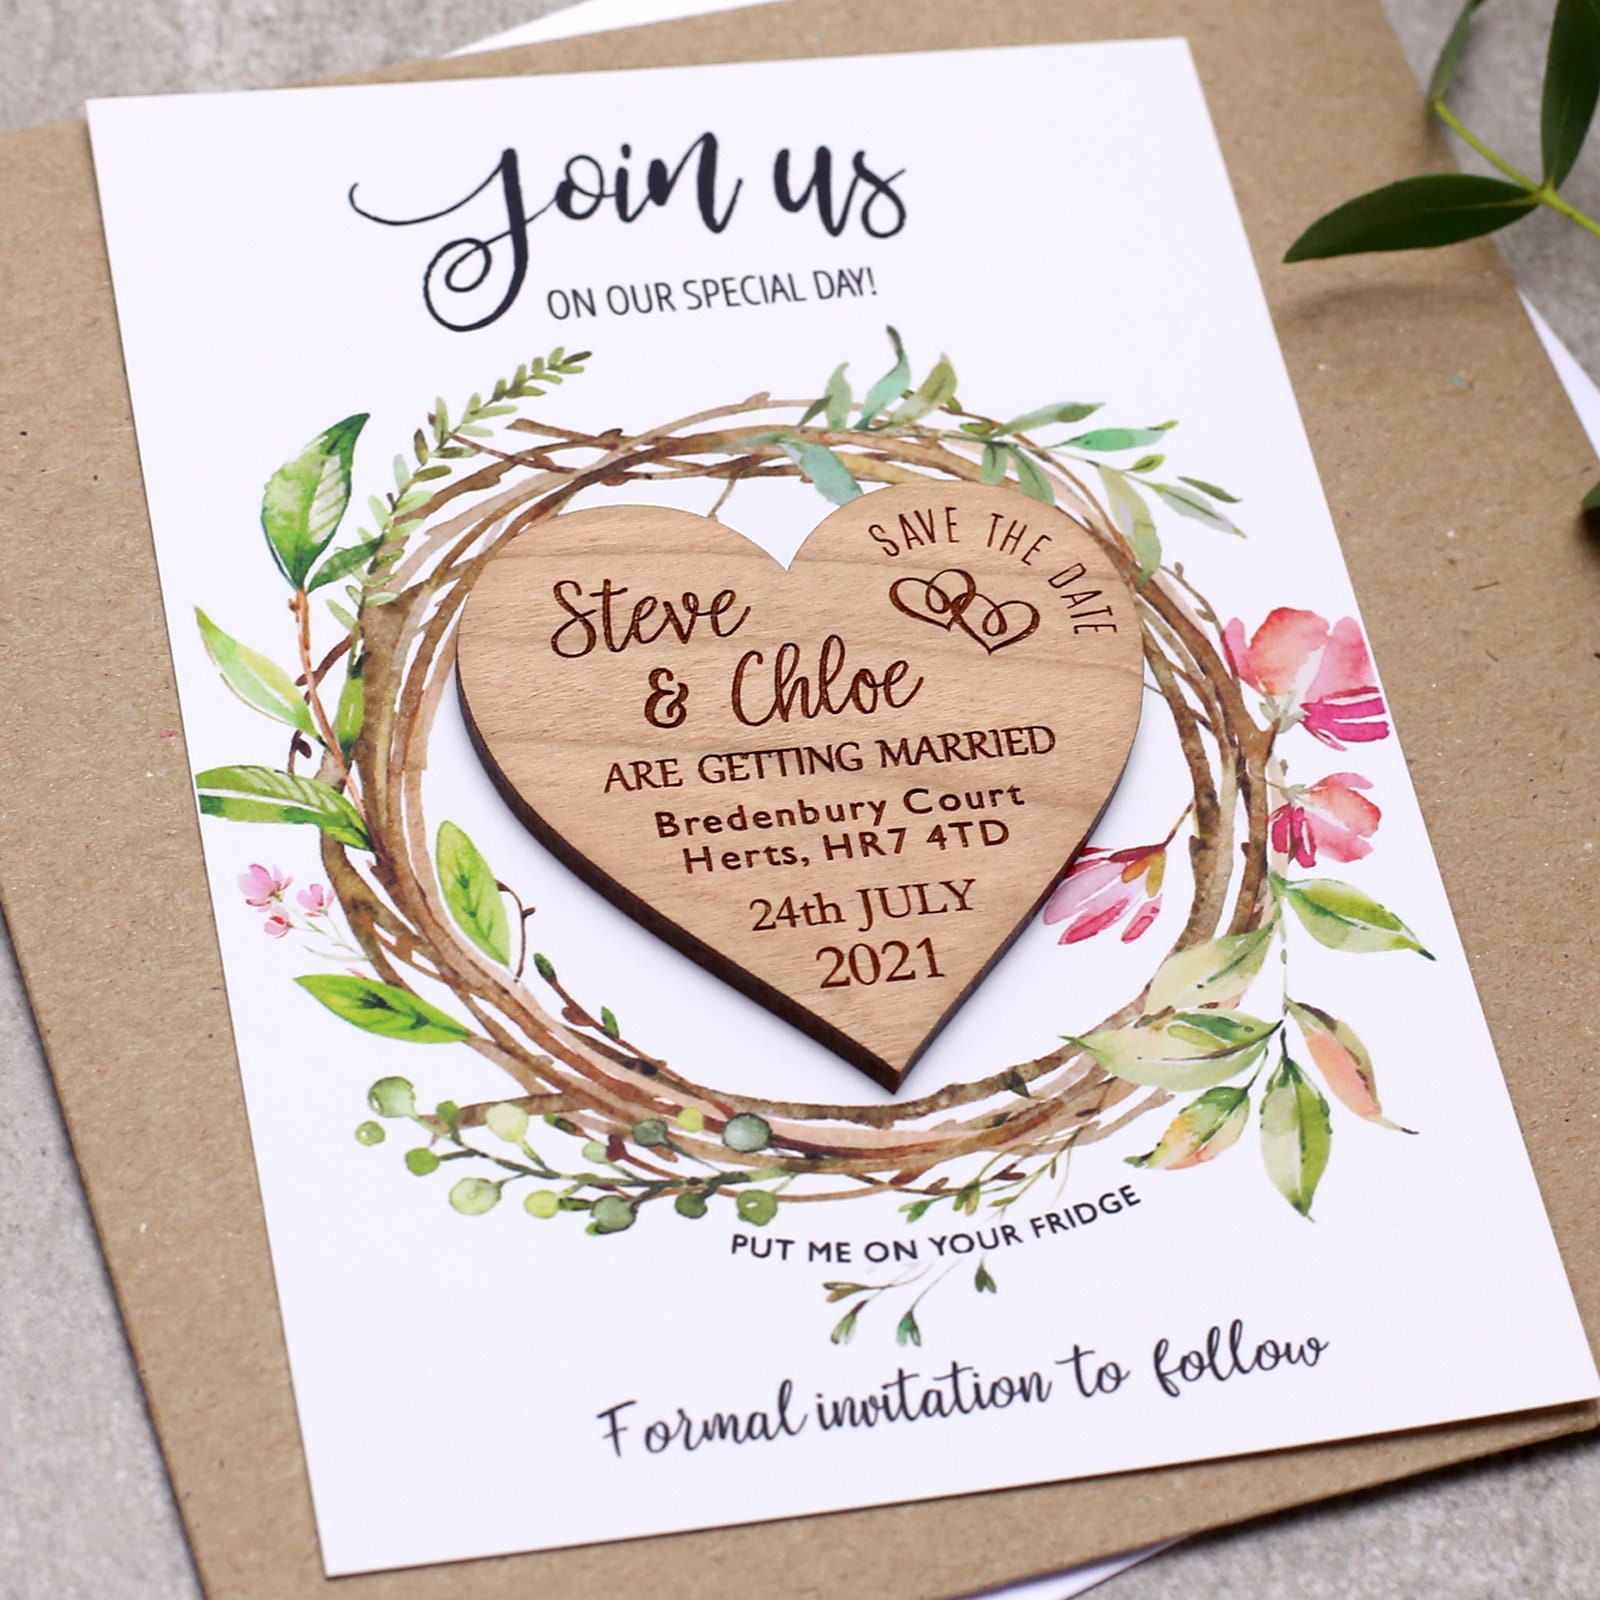 Personalised Rustic Wooden Butterfly Save The Date Fridge Magnet Wedding Invites 